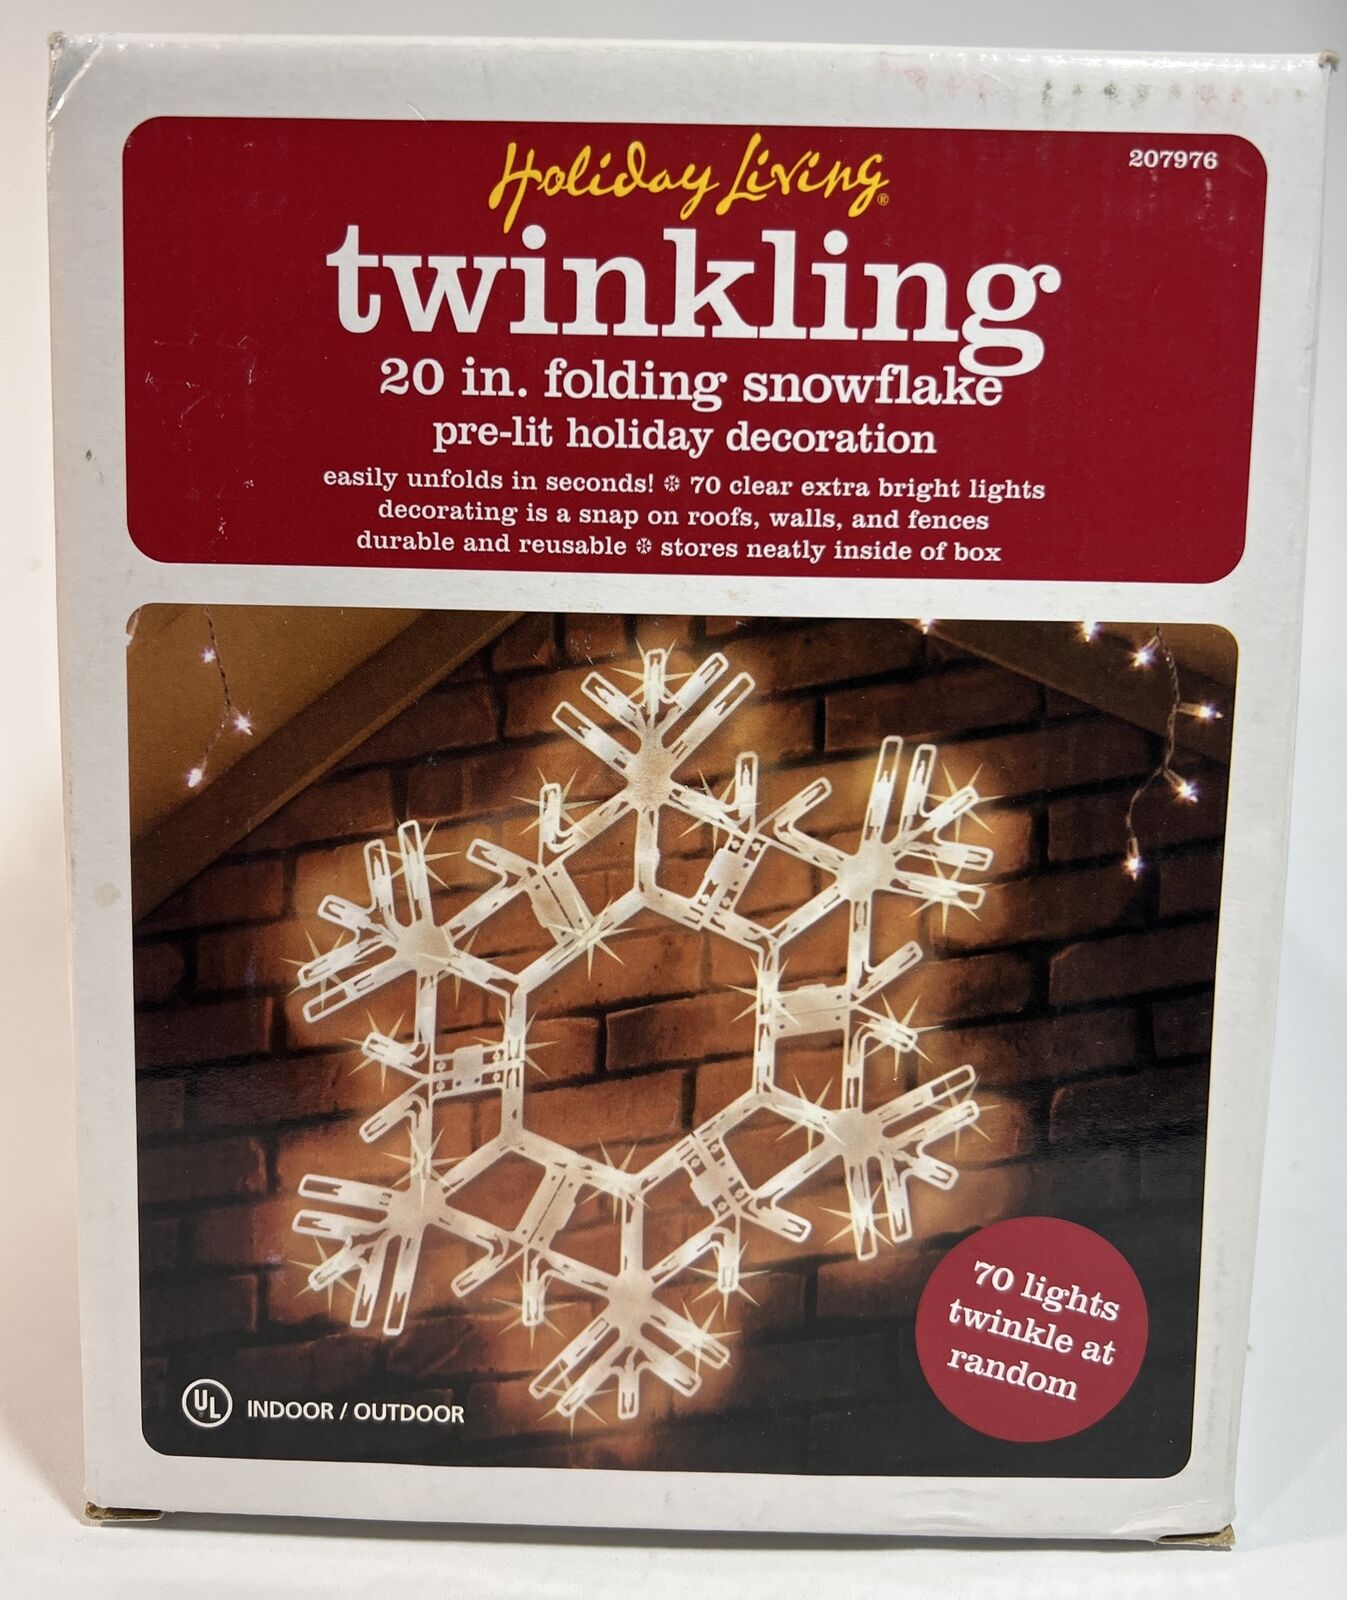 HOLIDAY LIVING Twinkling 20